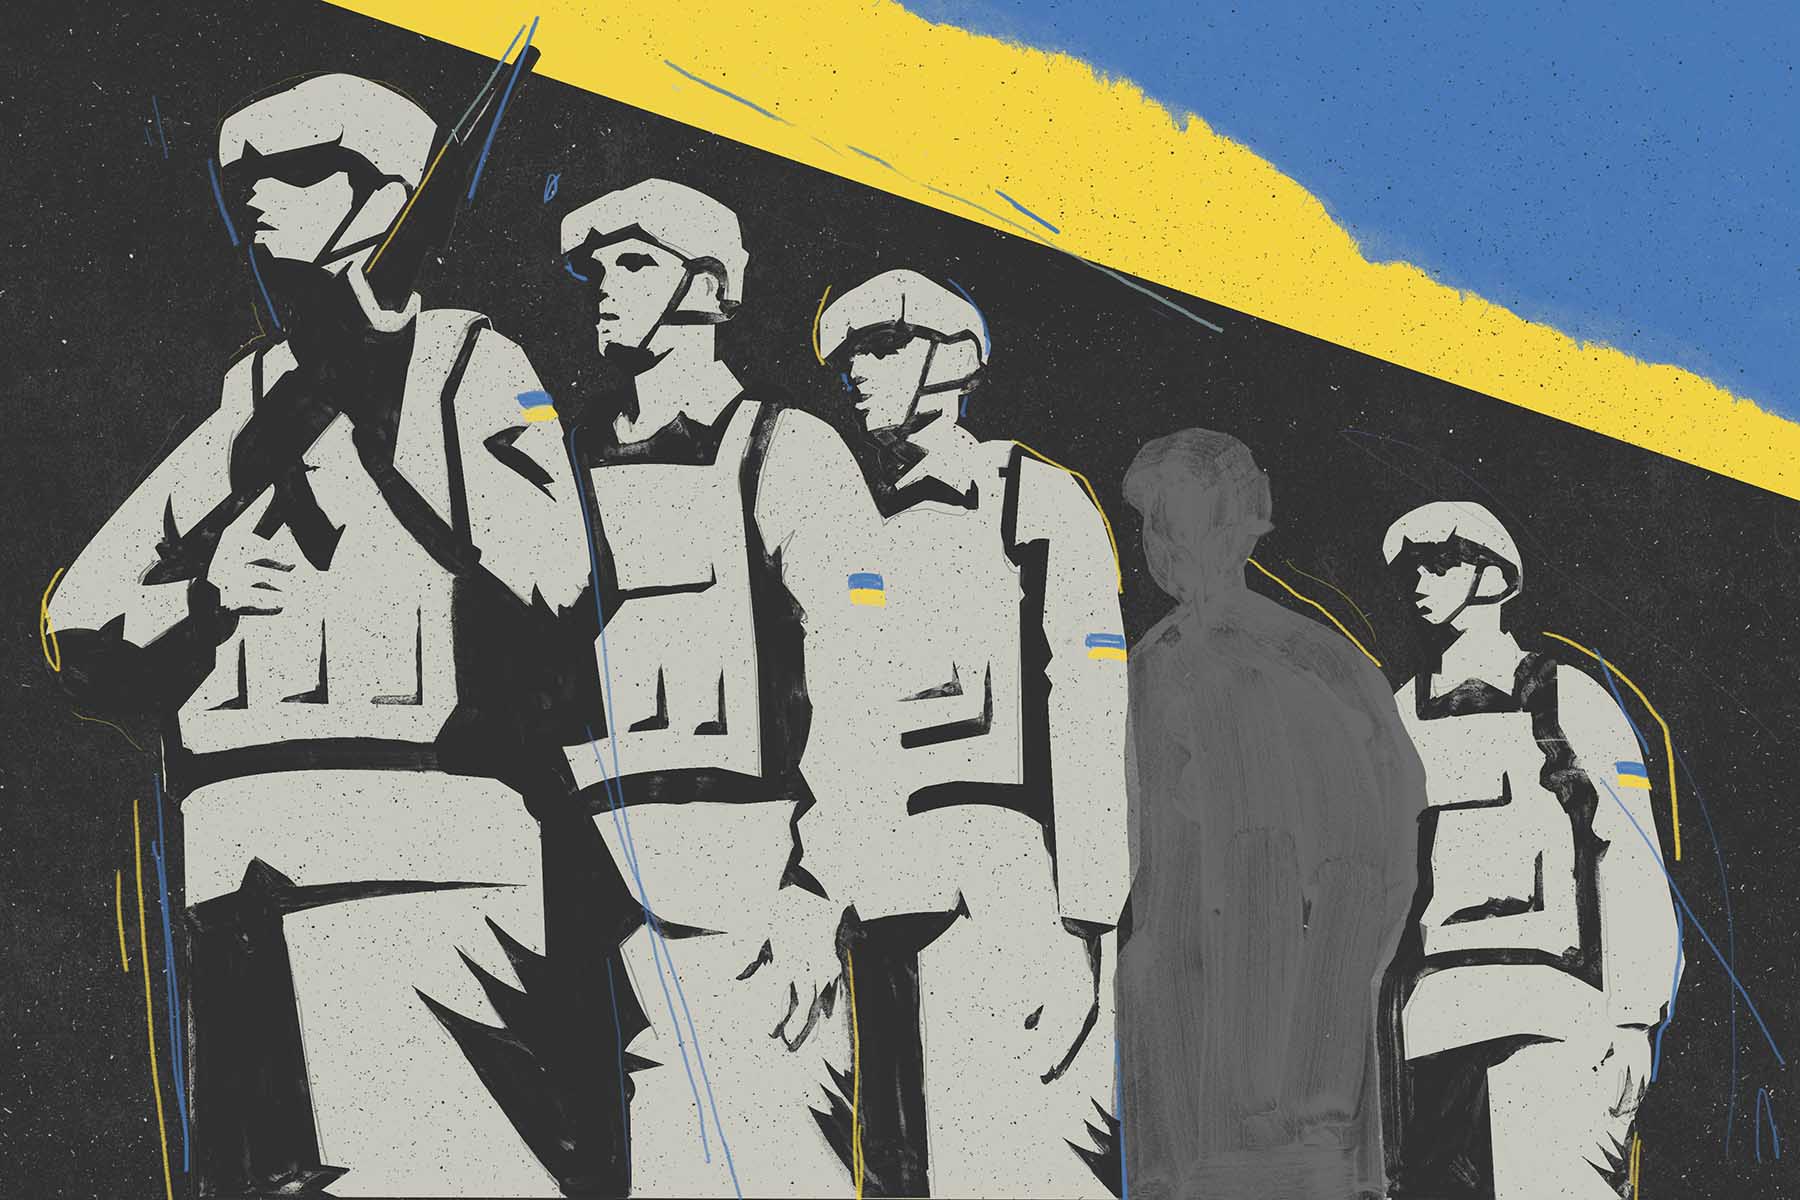 An illustration of four grey soldiers with blue and yellow Ukrainian flags on their sleeves line up; a fifth soldier appears only as a silhouette.